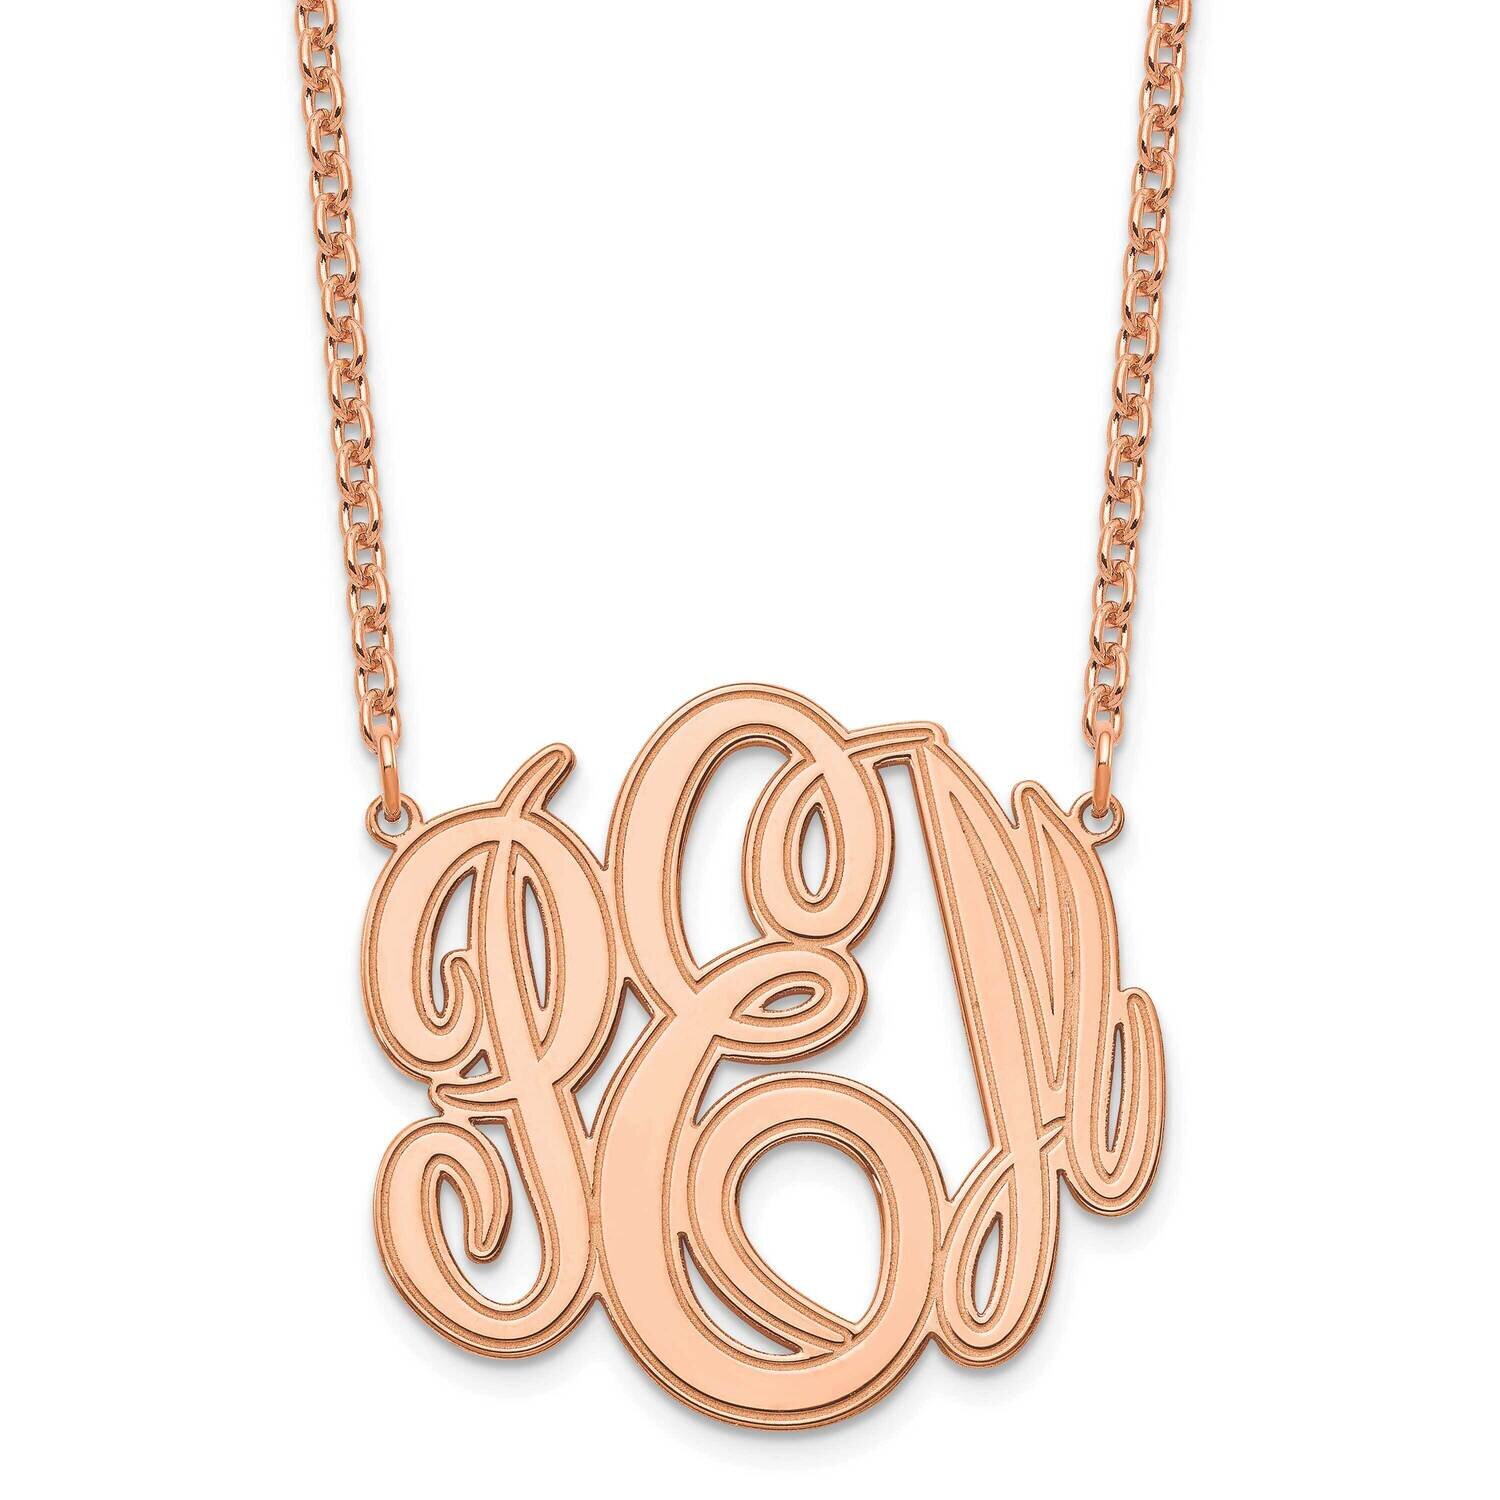 Etched Monogram Necklace Sterling Silver Rose-plated XNA889RP